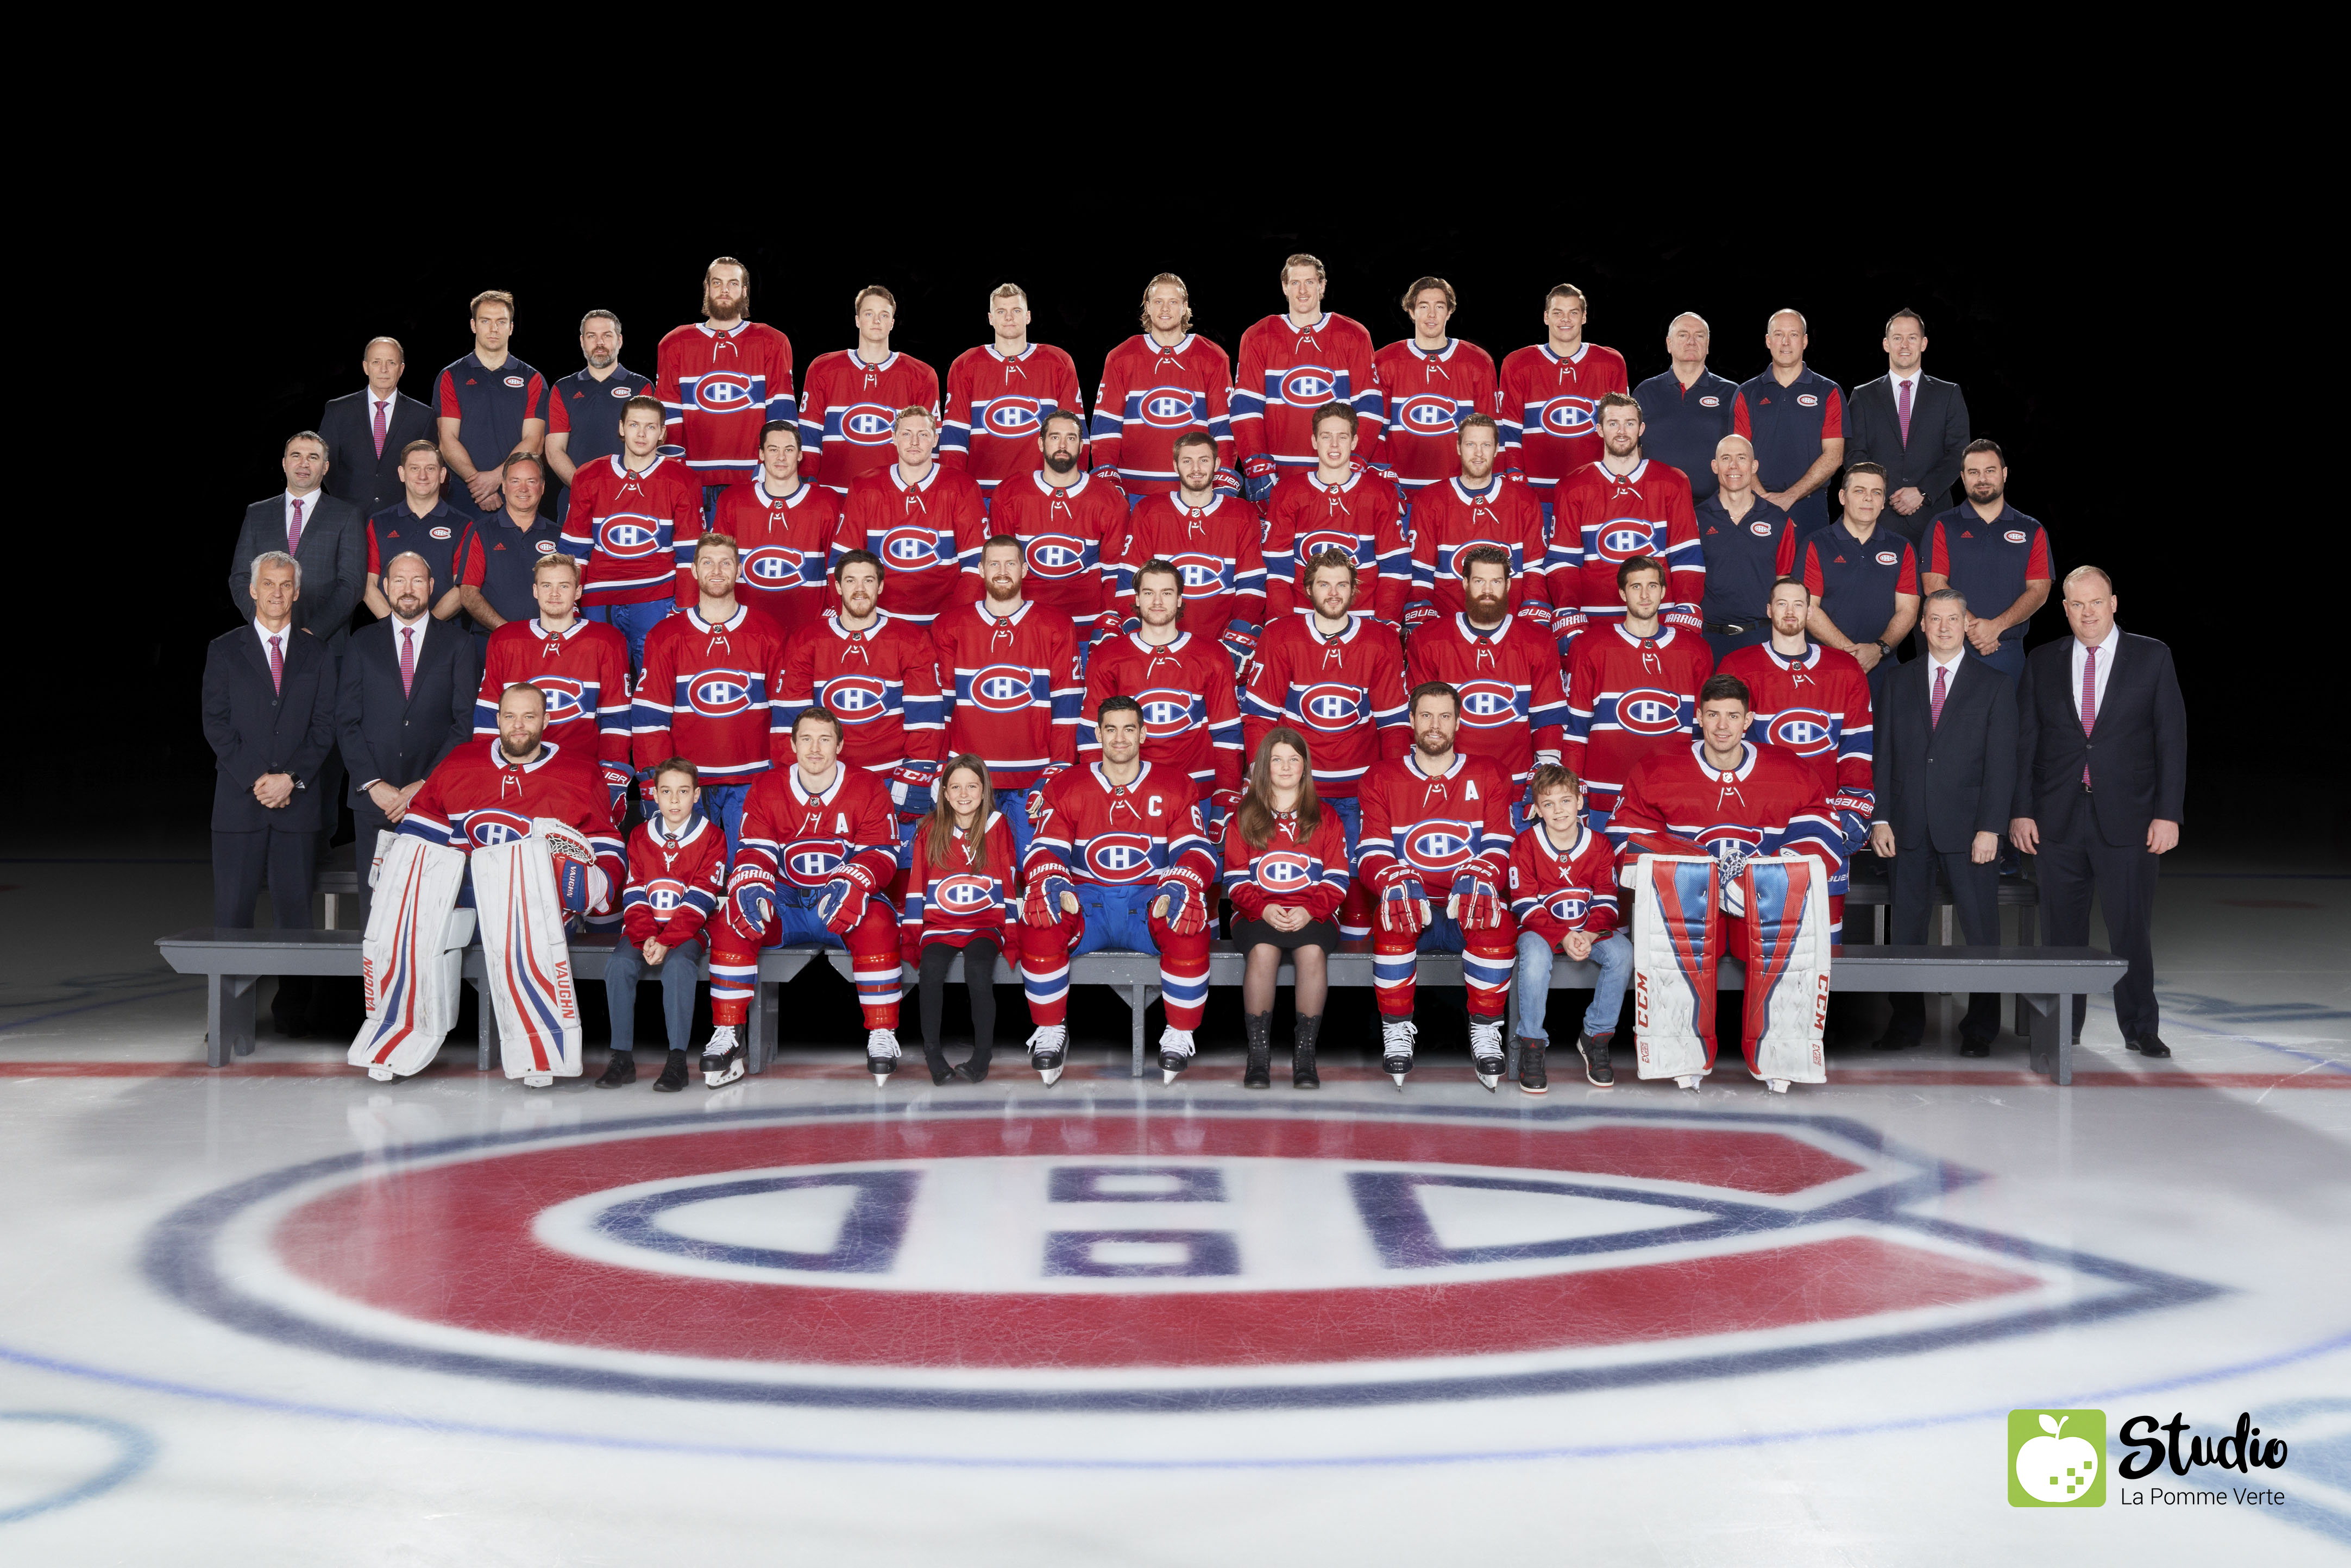 Montreal Canadiens hockey team official photo